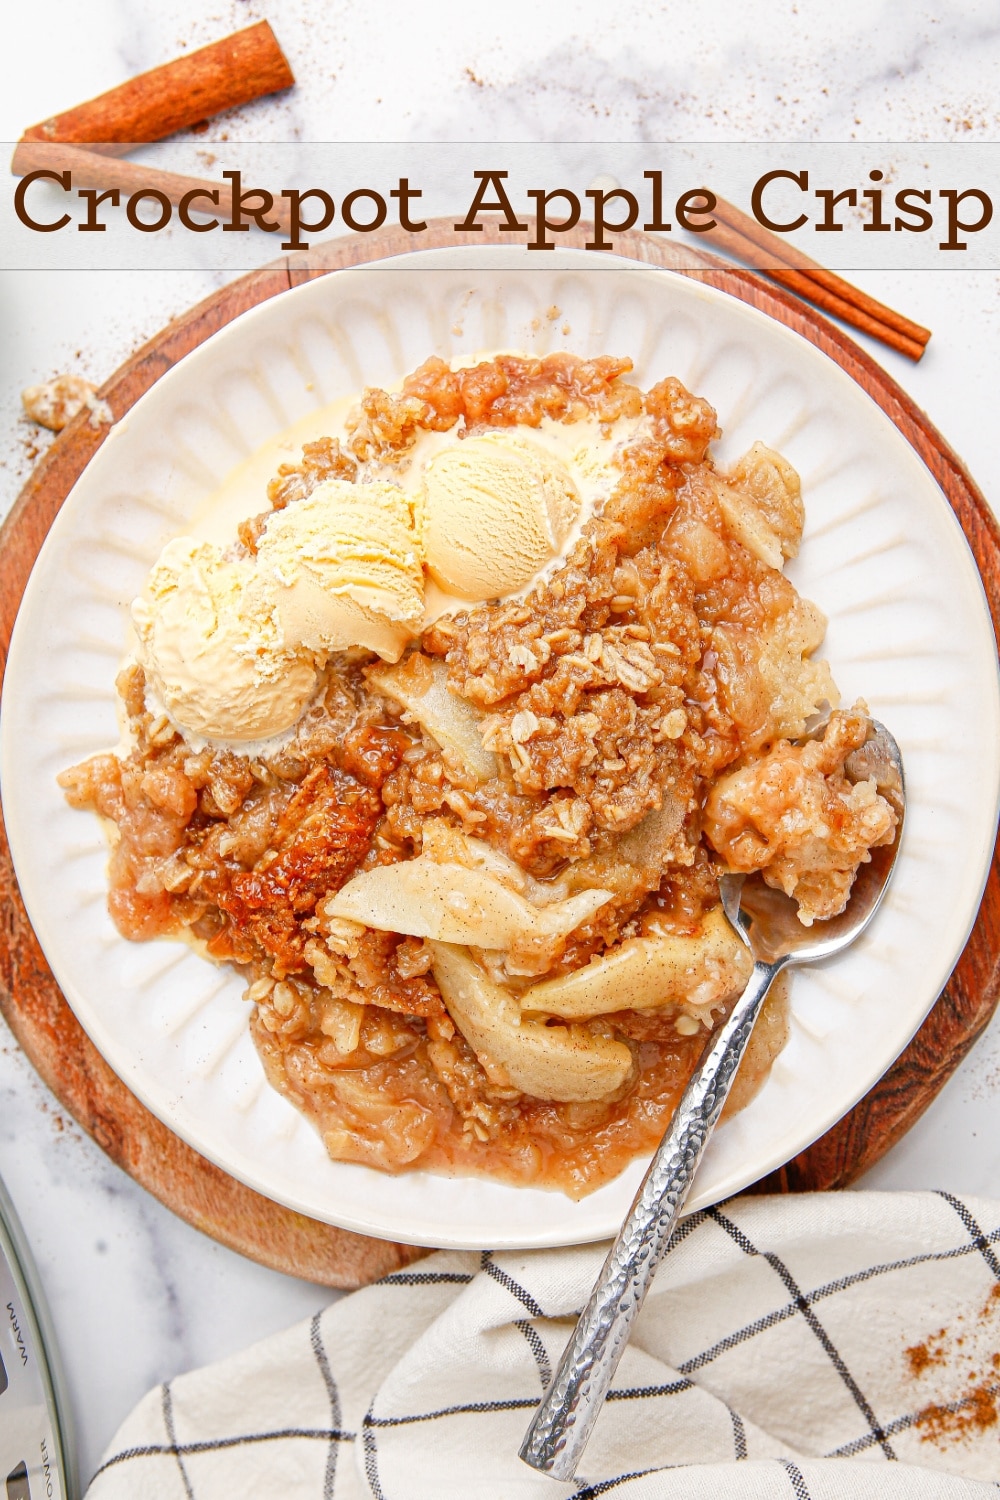 This simple recipe for Crockpot Apple Crisp comes with a game-changing tip, guaranteeing a crisp topping with an irresistibly crunchy and delicately browned result. This is the fall dessert you're going to make again and again. via @cmpollak1